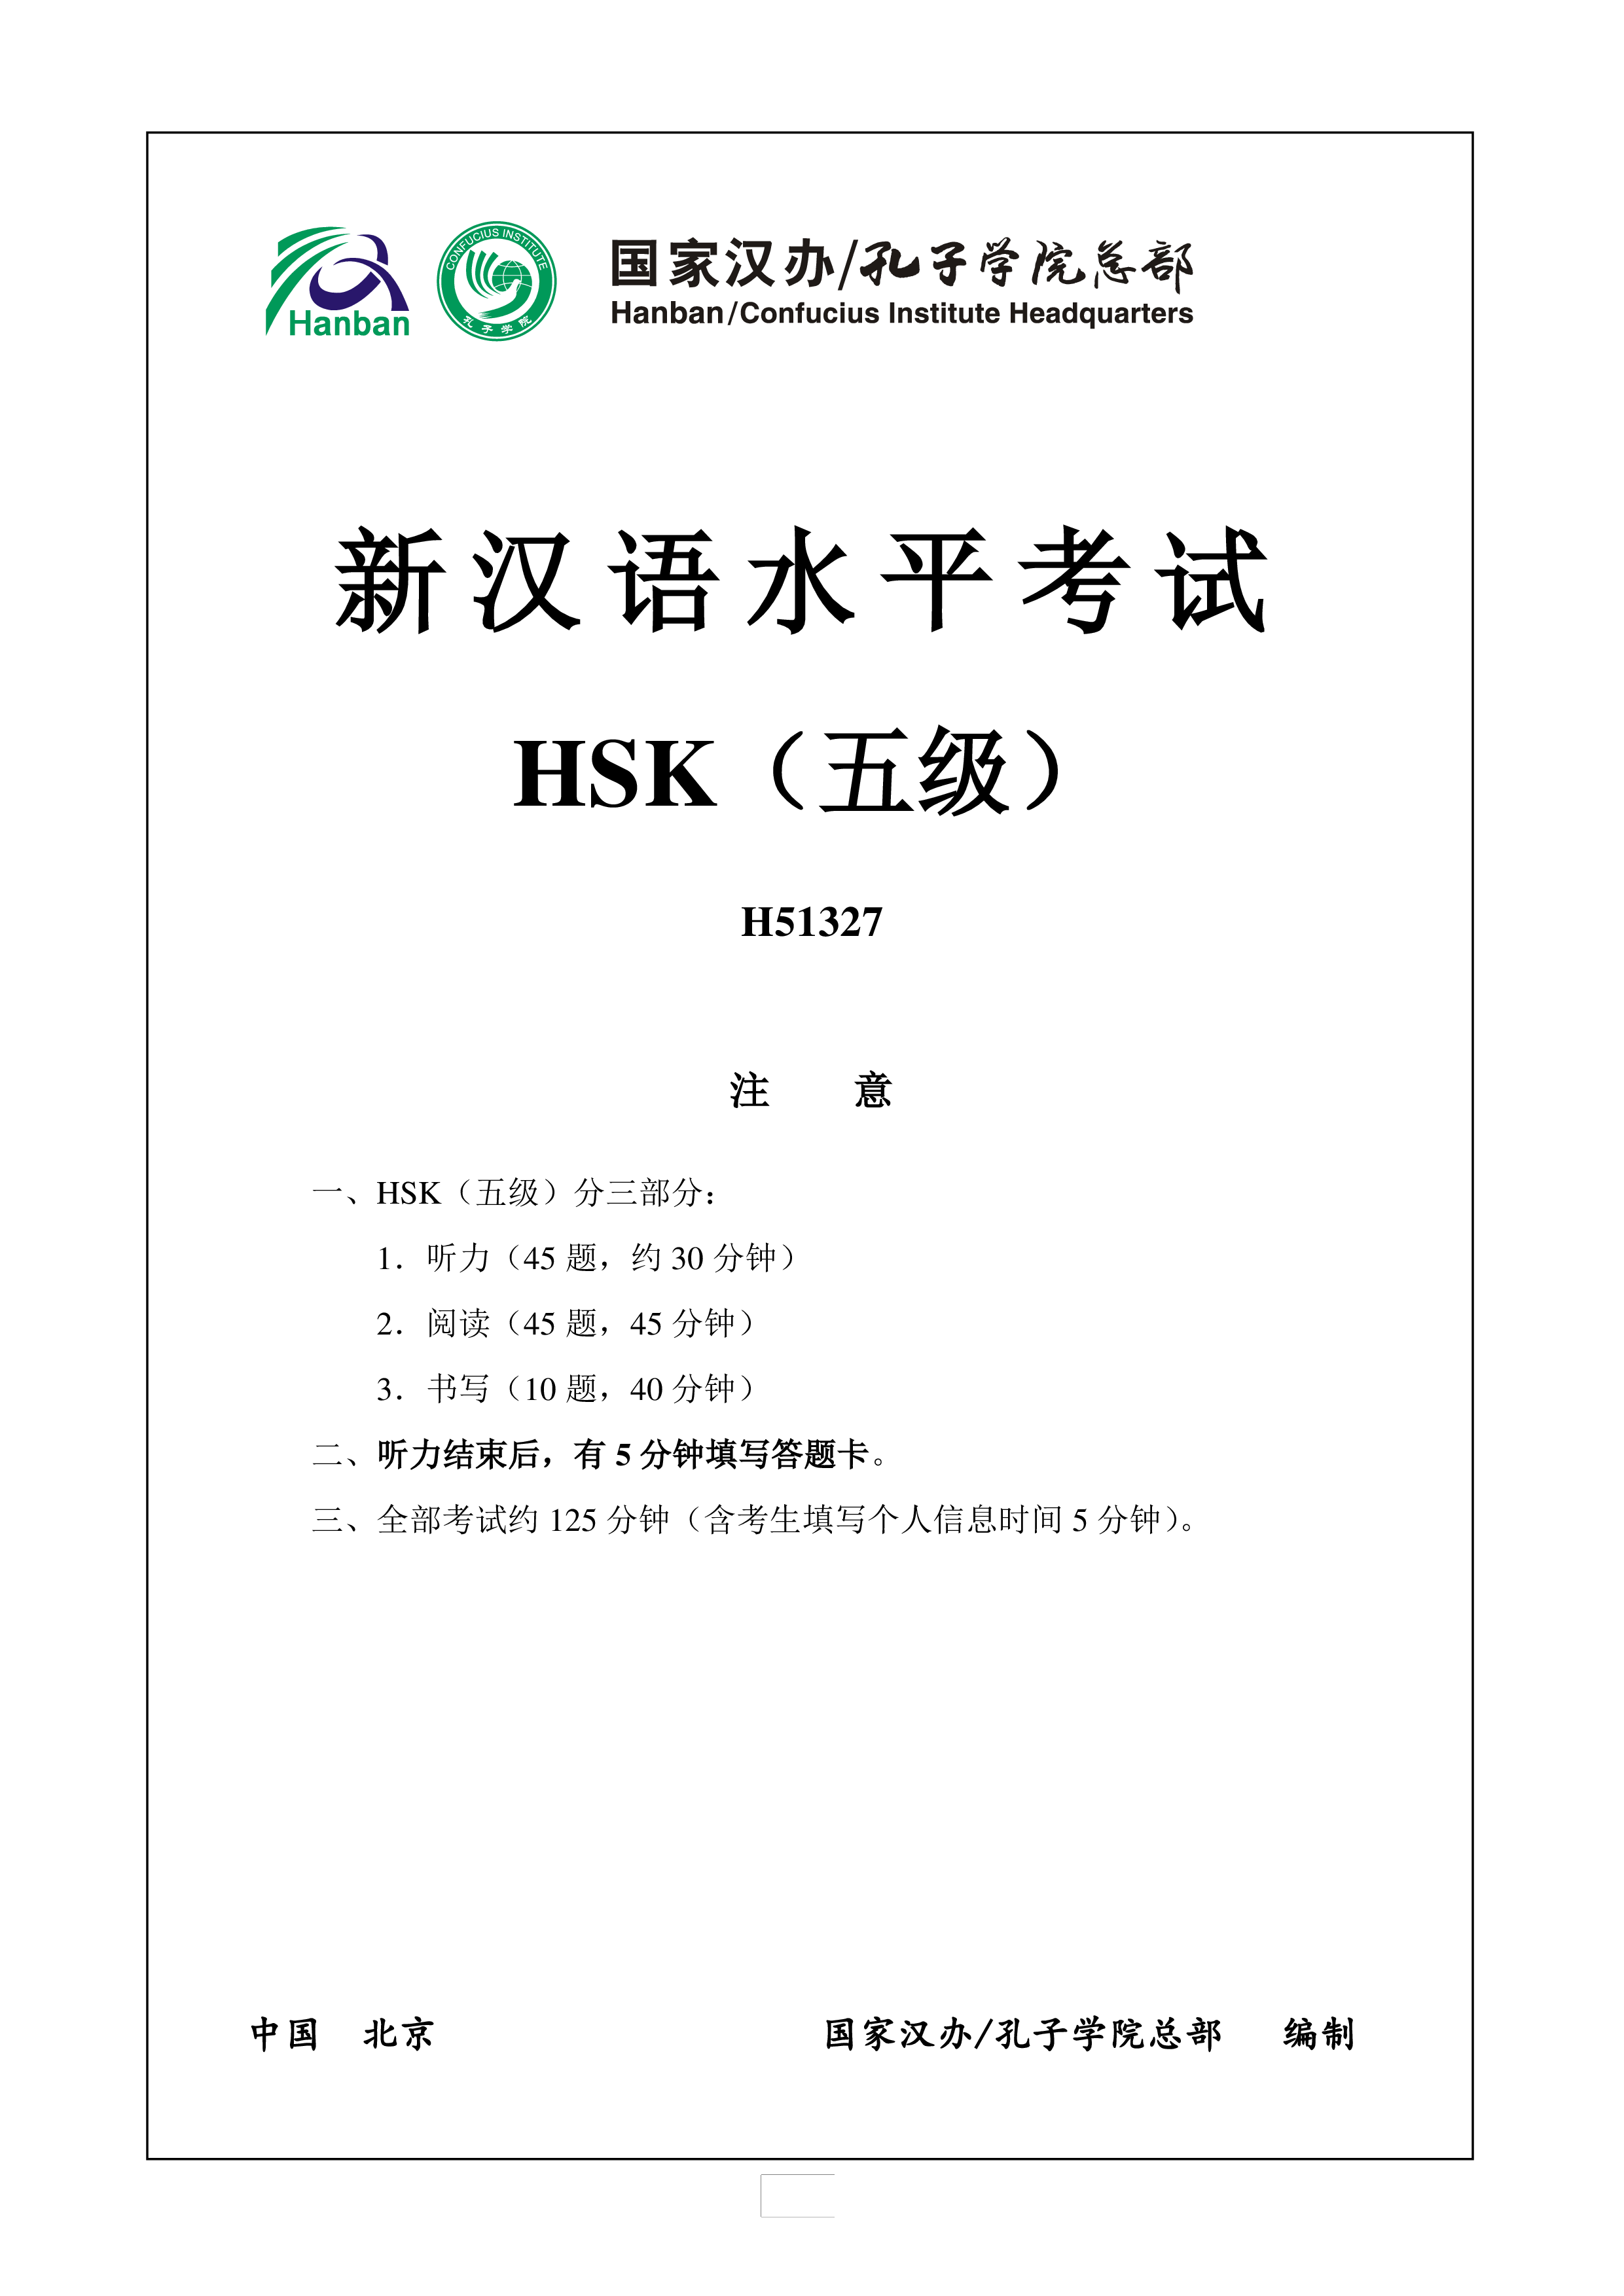 hsk5 chinese exam, incl audio and answer # h51327 template